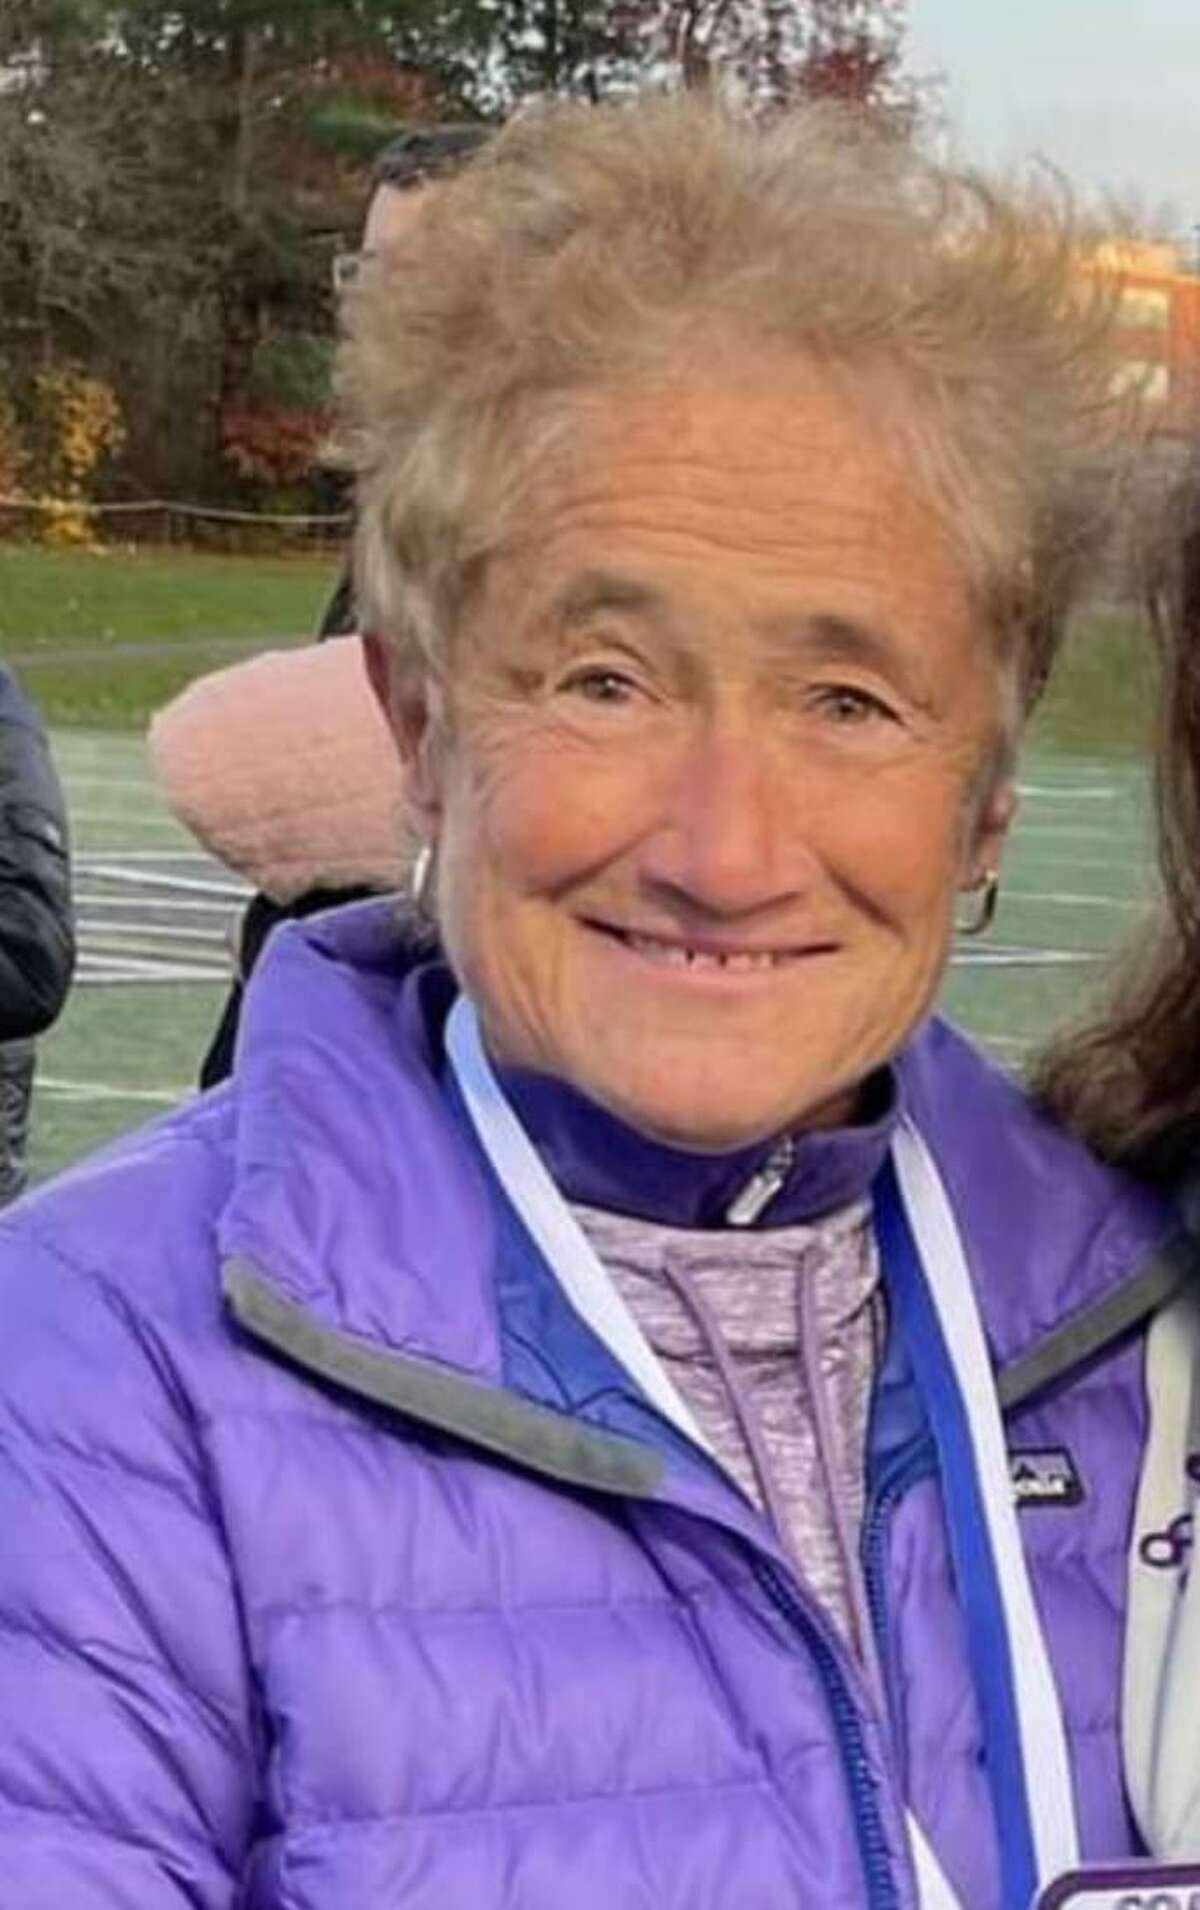 North Branford fied hockey coach Babby Nuhn, the 2021 Register All-Area Field Hockey Coach of the Year